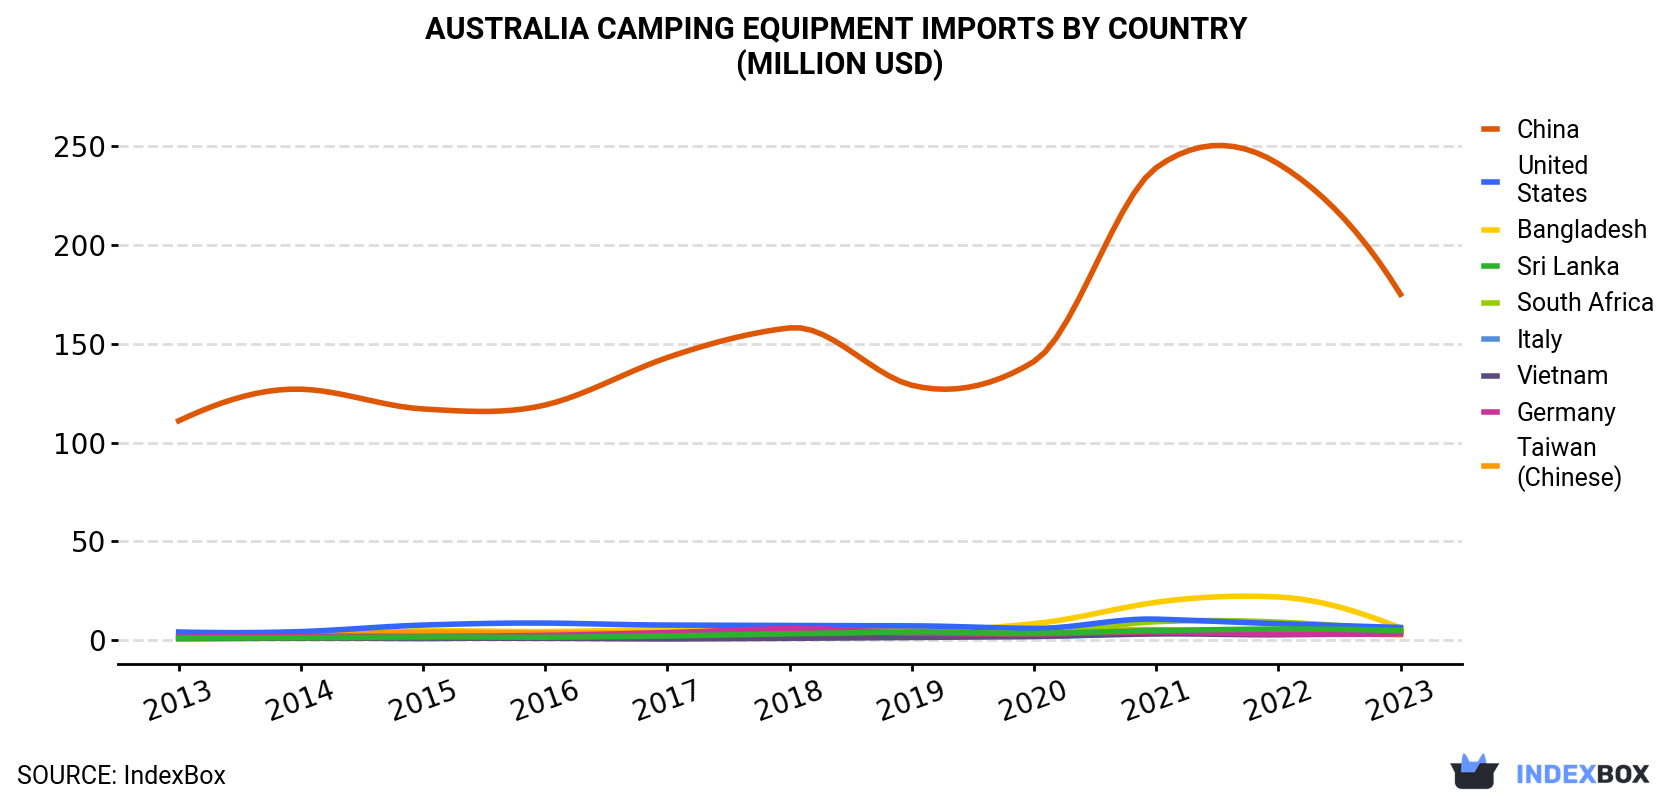 Australia Camping Equipment Imports By Country (Million USD)